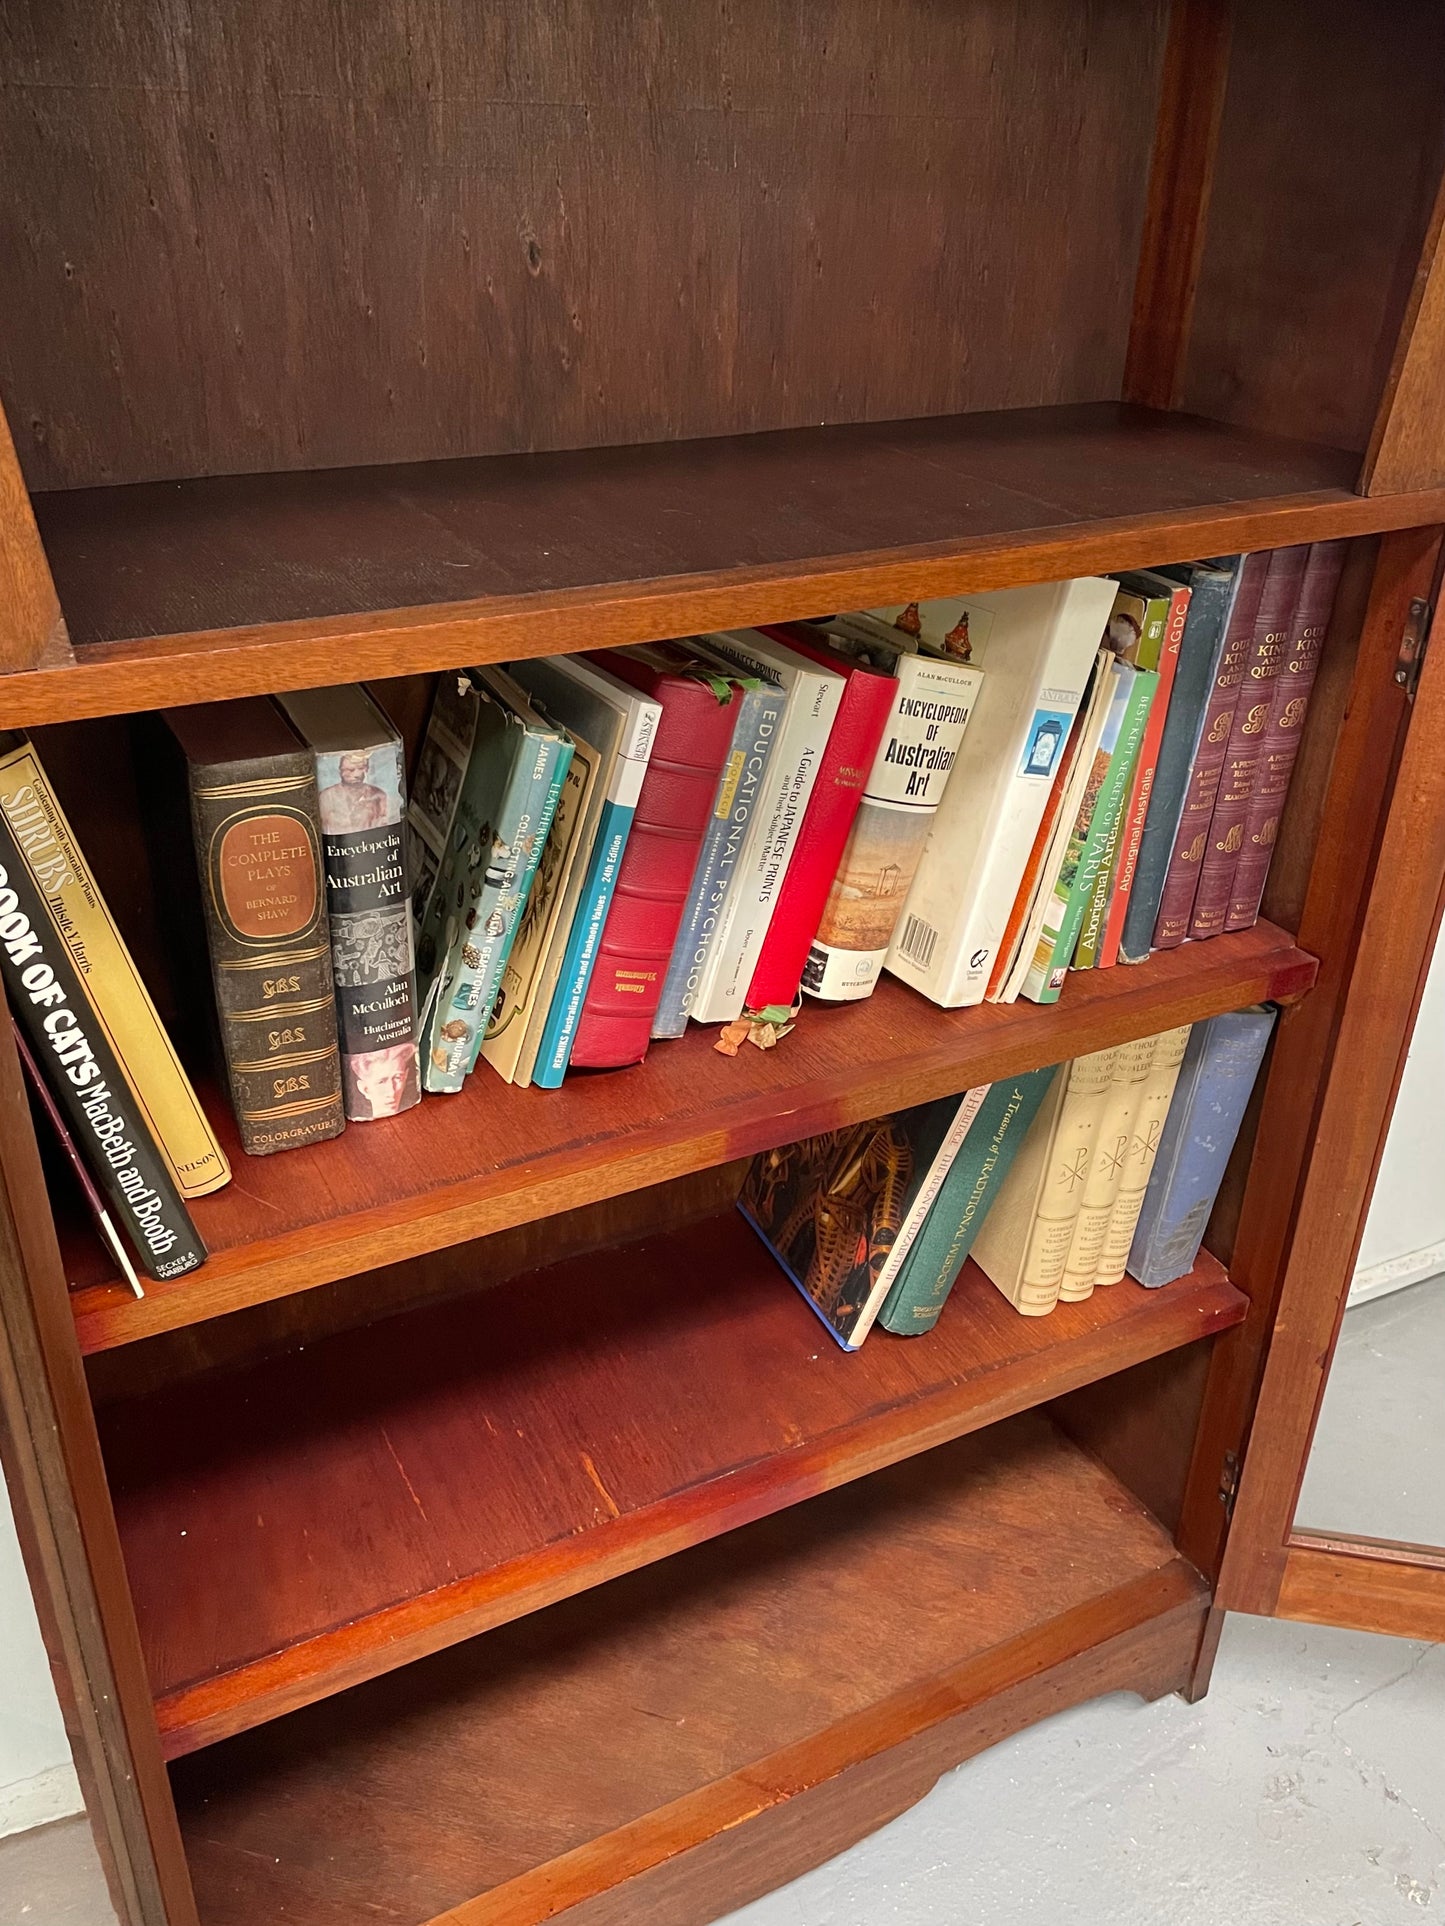 Practical Arts and Crafts <span data-mce-fragment="1"> bookcase featuring two glass doors and three fixed shelves. Perfect for organizing your books or showcasing your favorite pieces, this bookcase also includes a top shelf for additional display space. I</span>t has been sourced locally and is in good original condition.